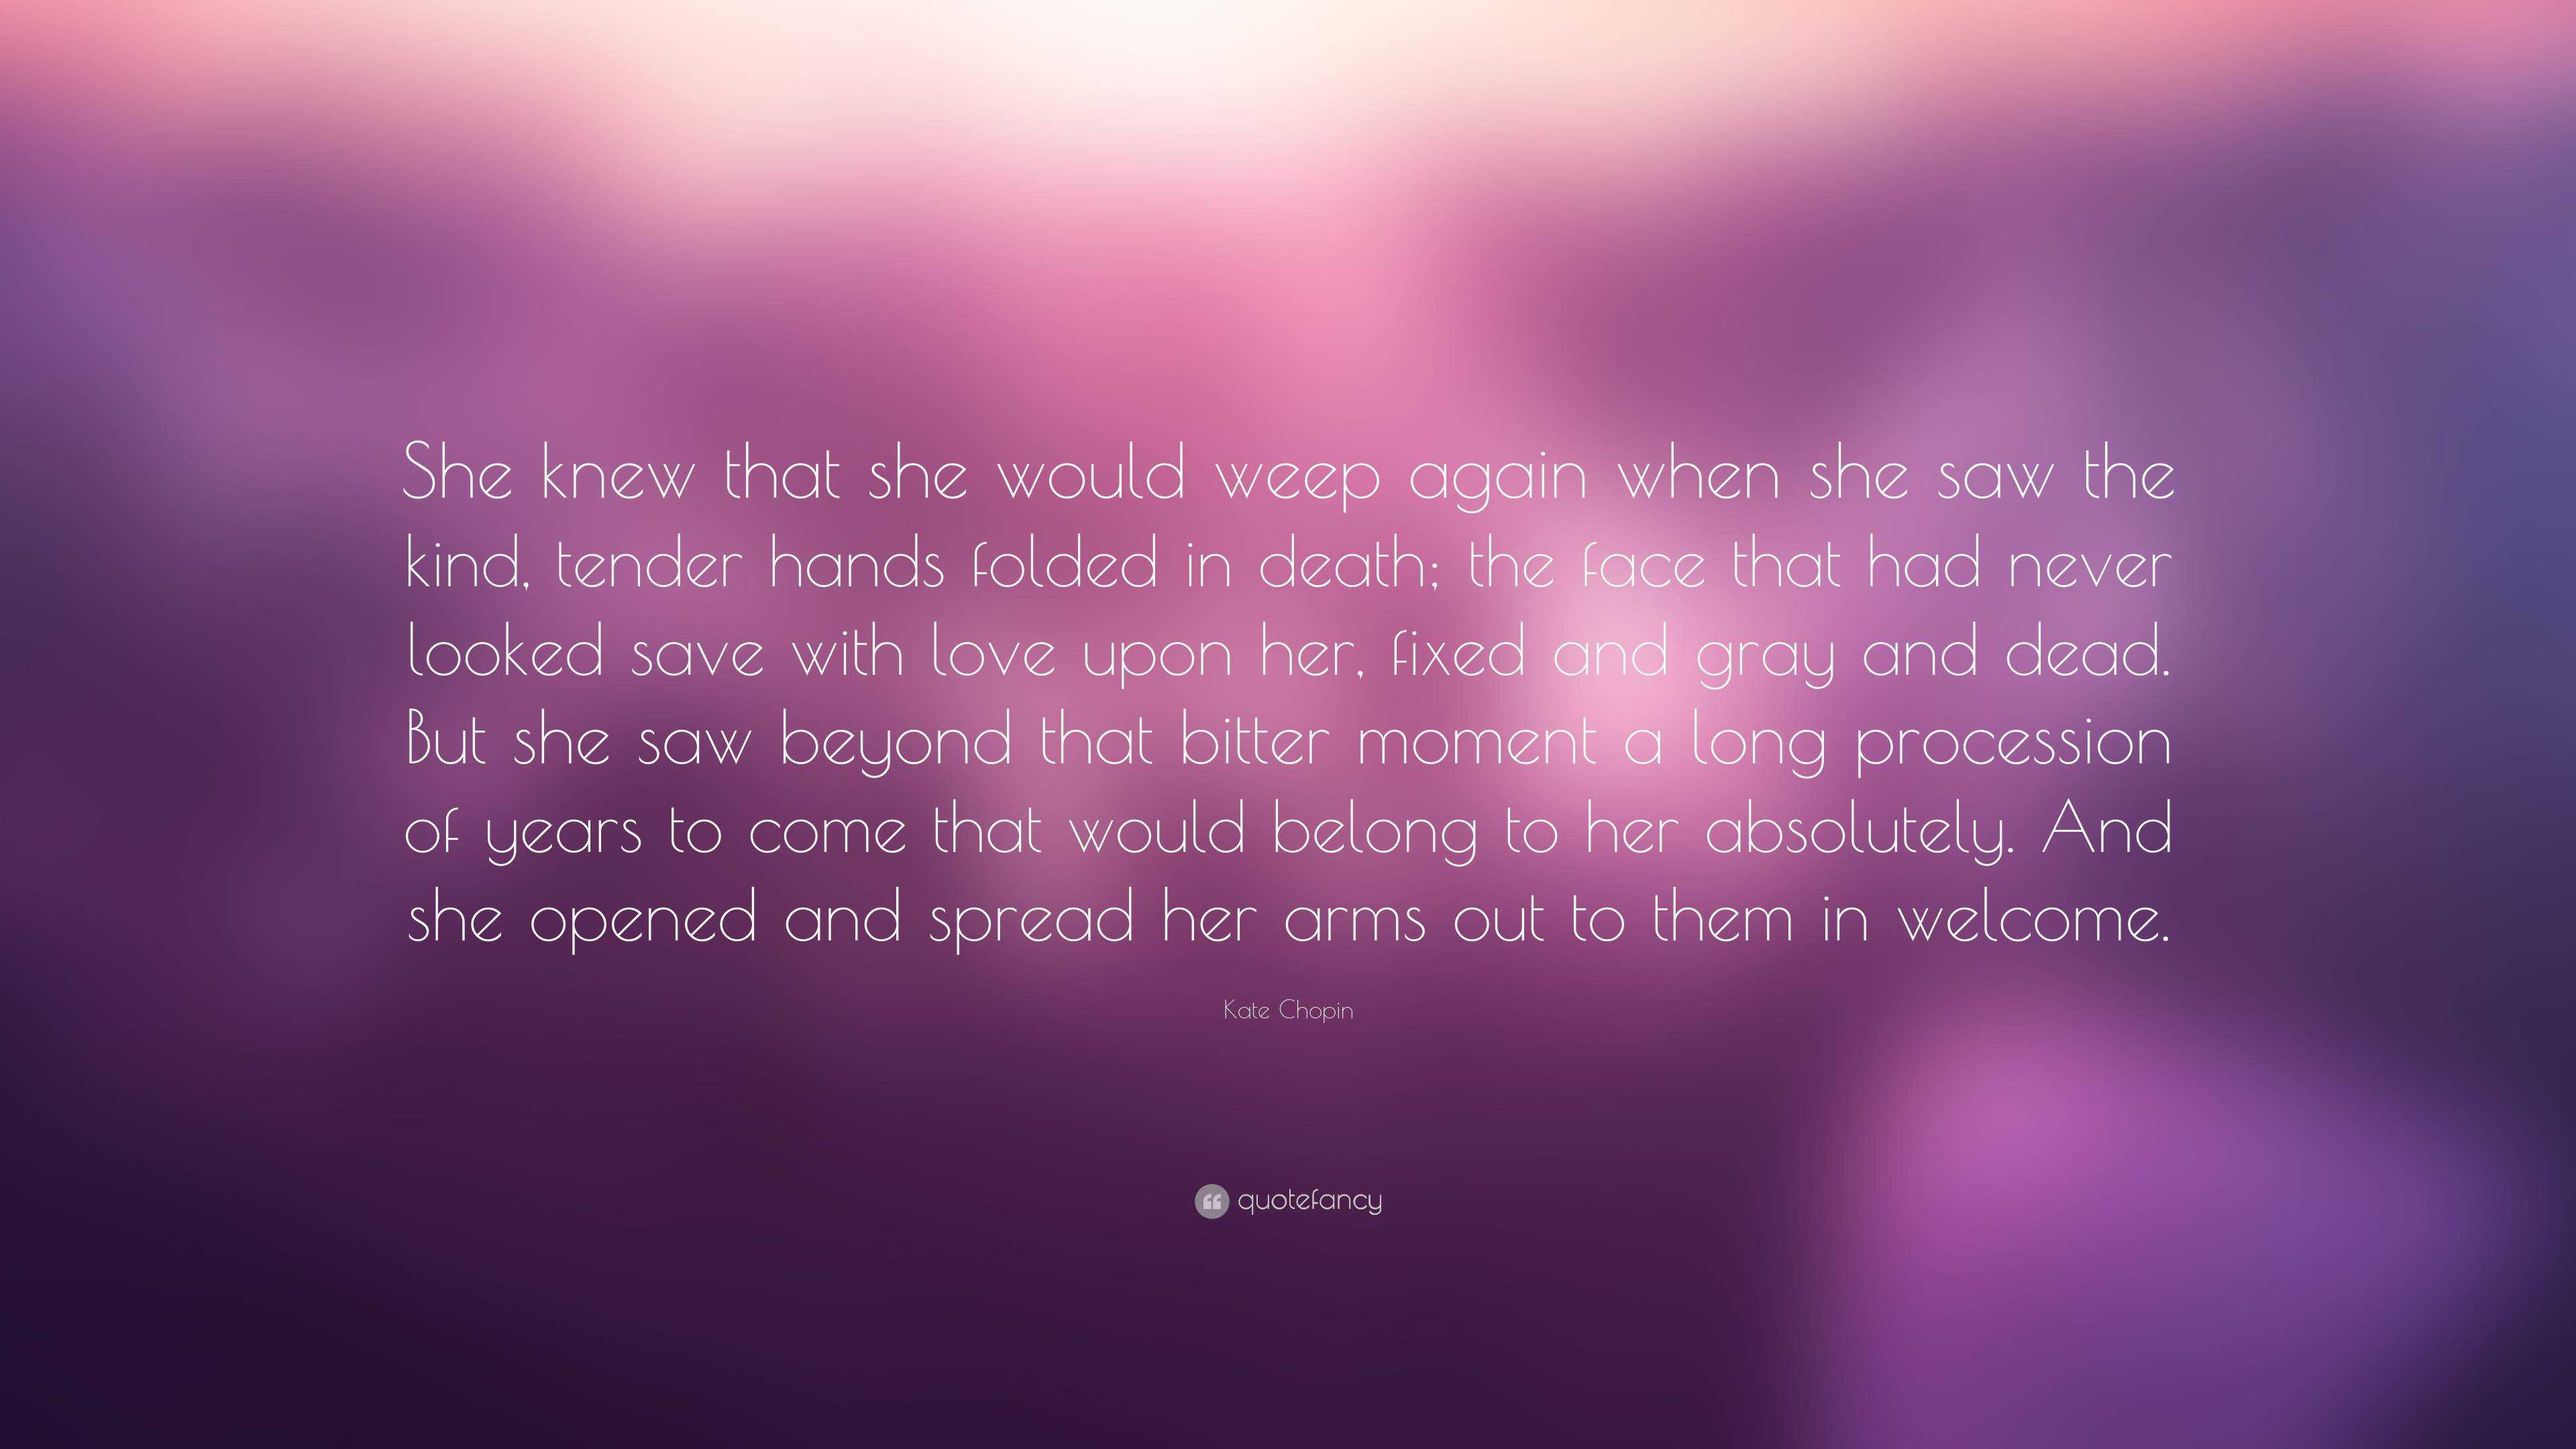 Kate Chopin Quote: “She knew that she would weep again when she saw the ...